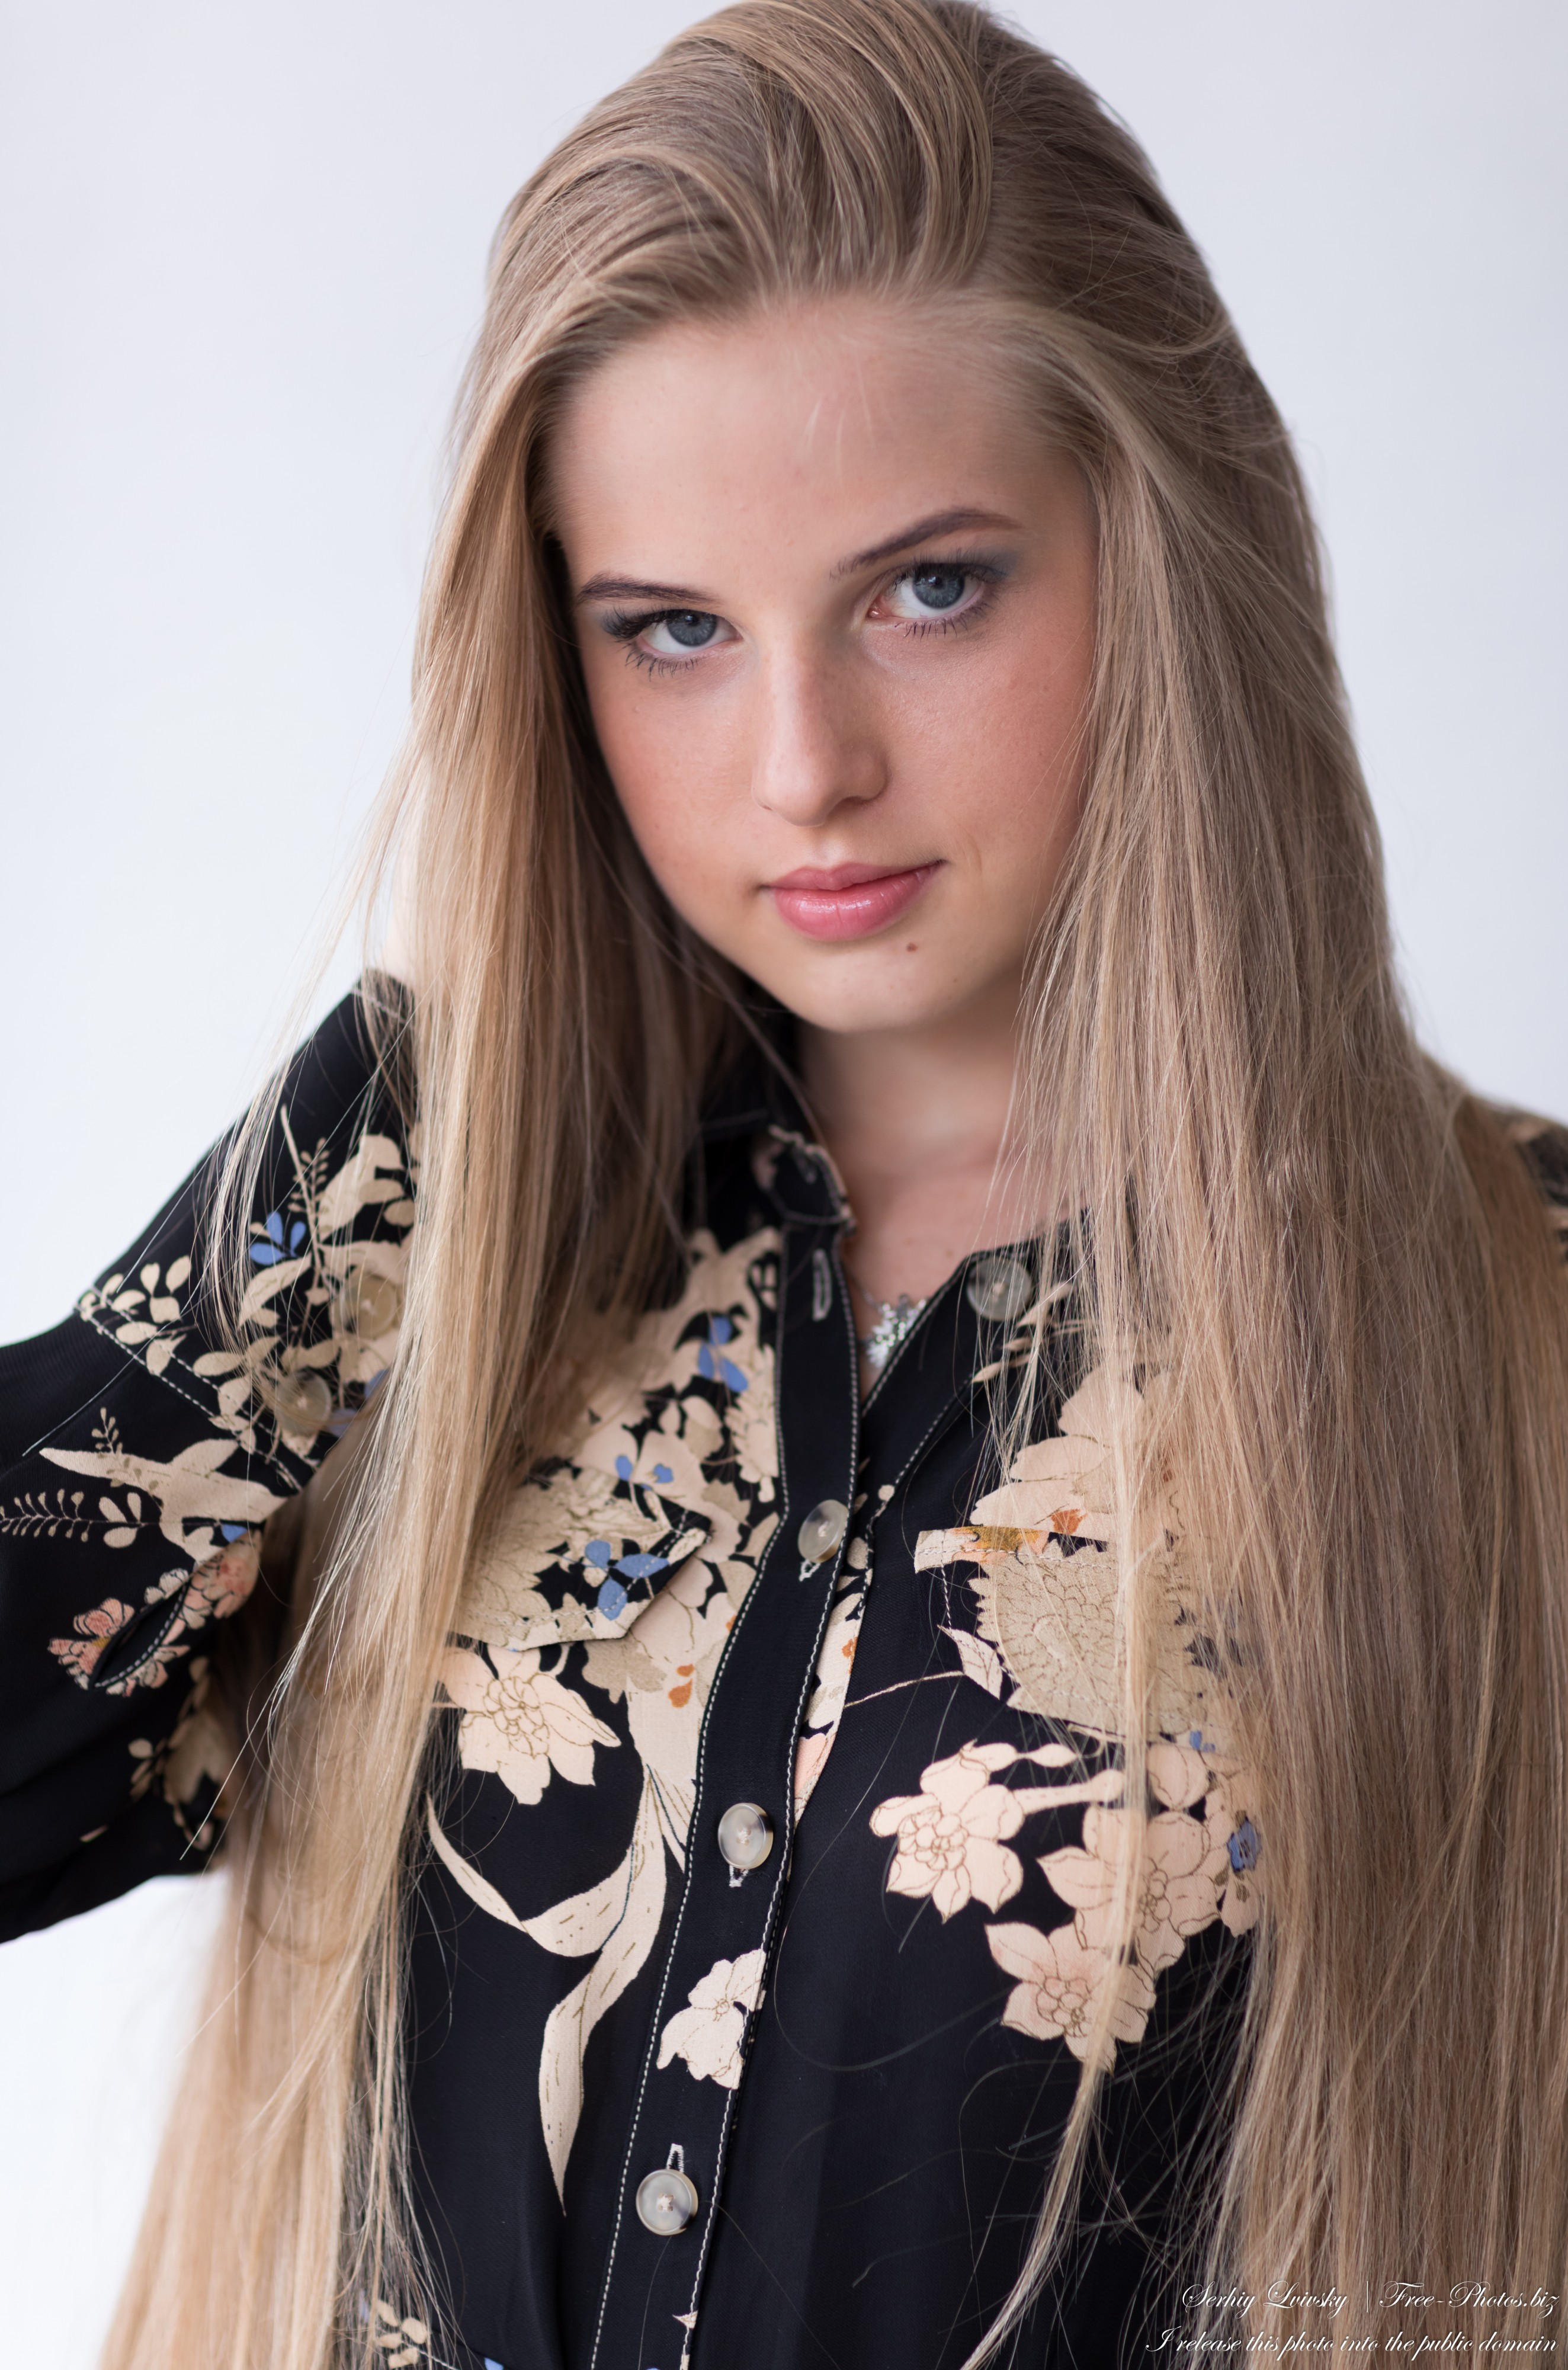 Photo Of Diana An 18 Year Old Natural Blonde Girl Photographed In August 2020 By Serhiy